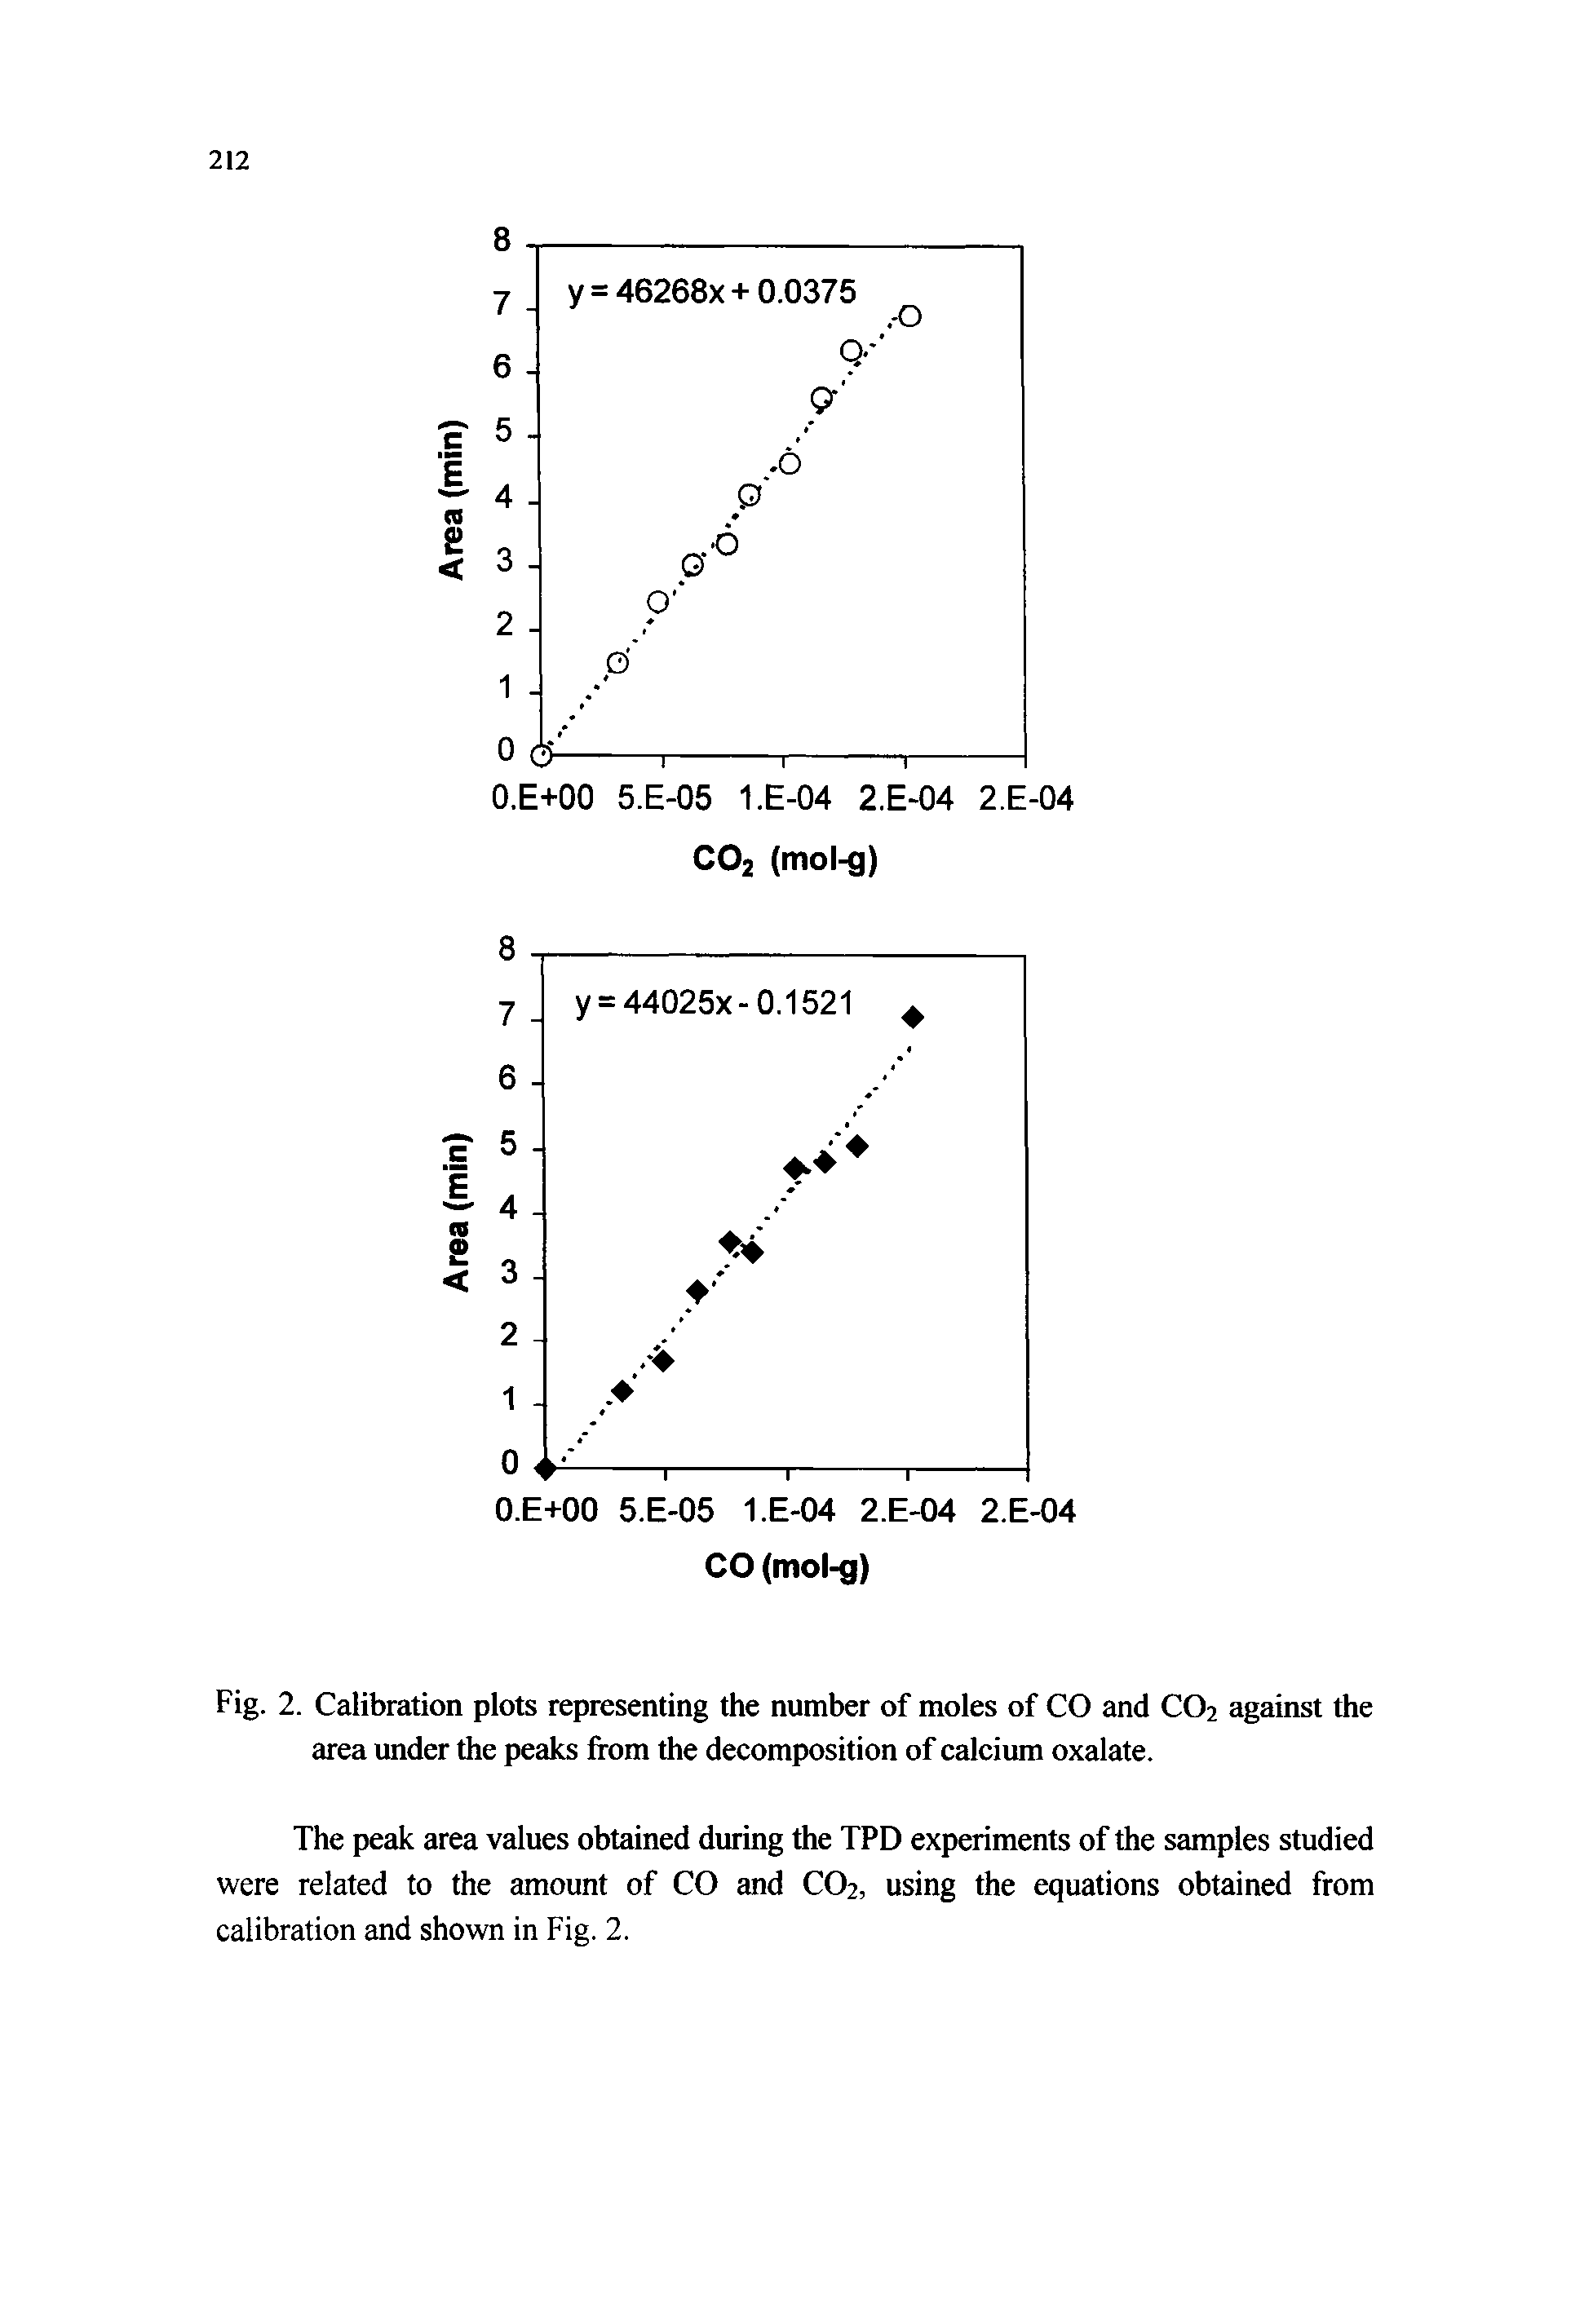 Fig. 2. Calibration plots representing the number of moles of CO and CO2 against the area under the peaks from the decomposition of calcium oxalate.